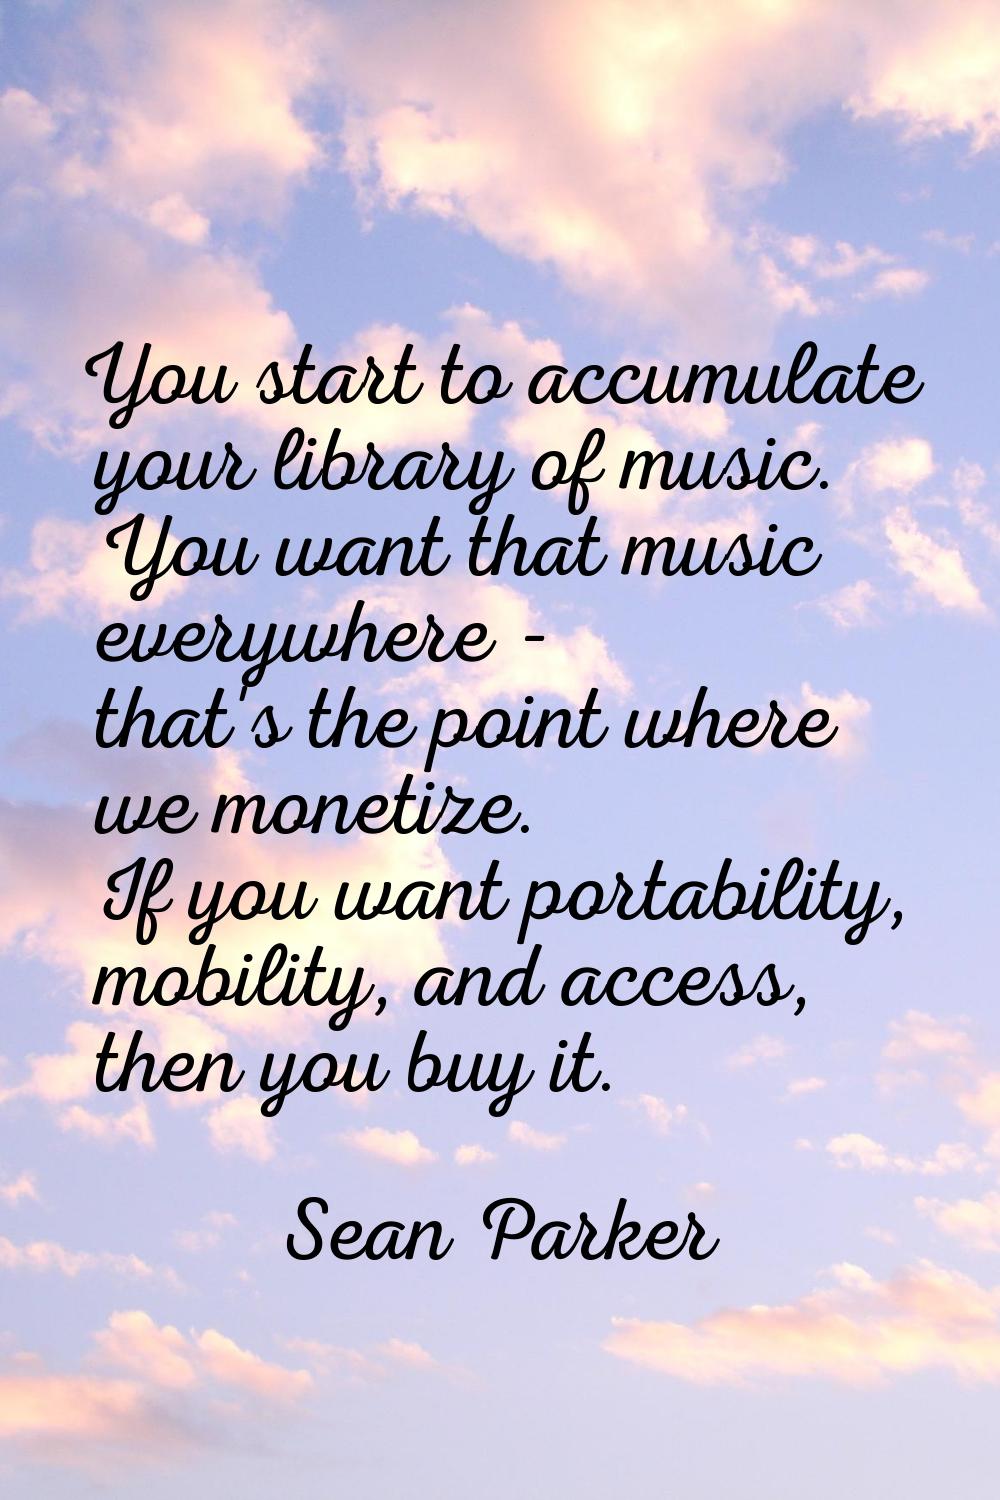 You start to accumulate your library of music. You want that music everywhere - that's the point wh